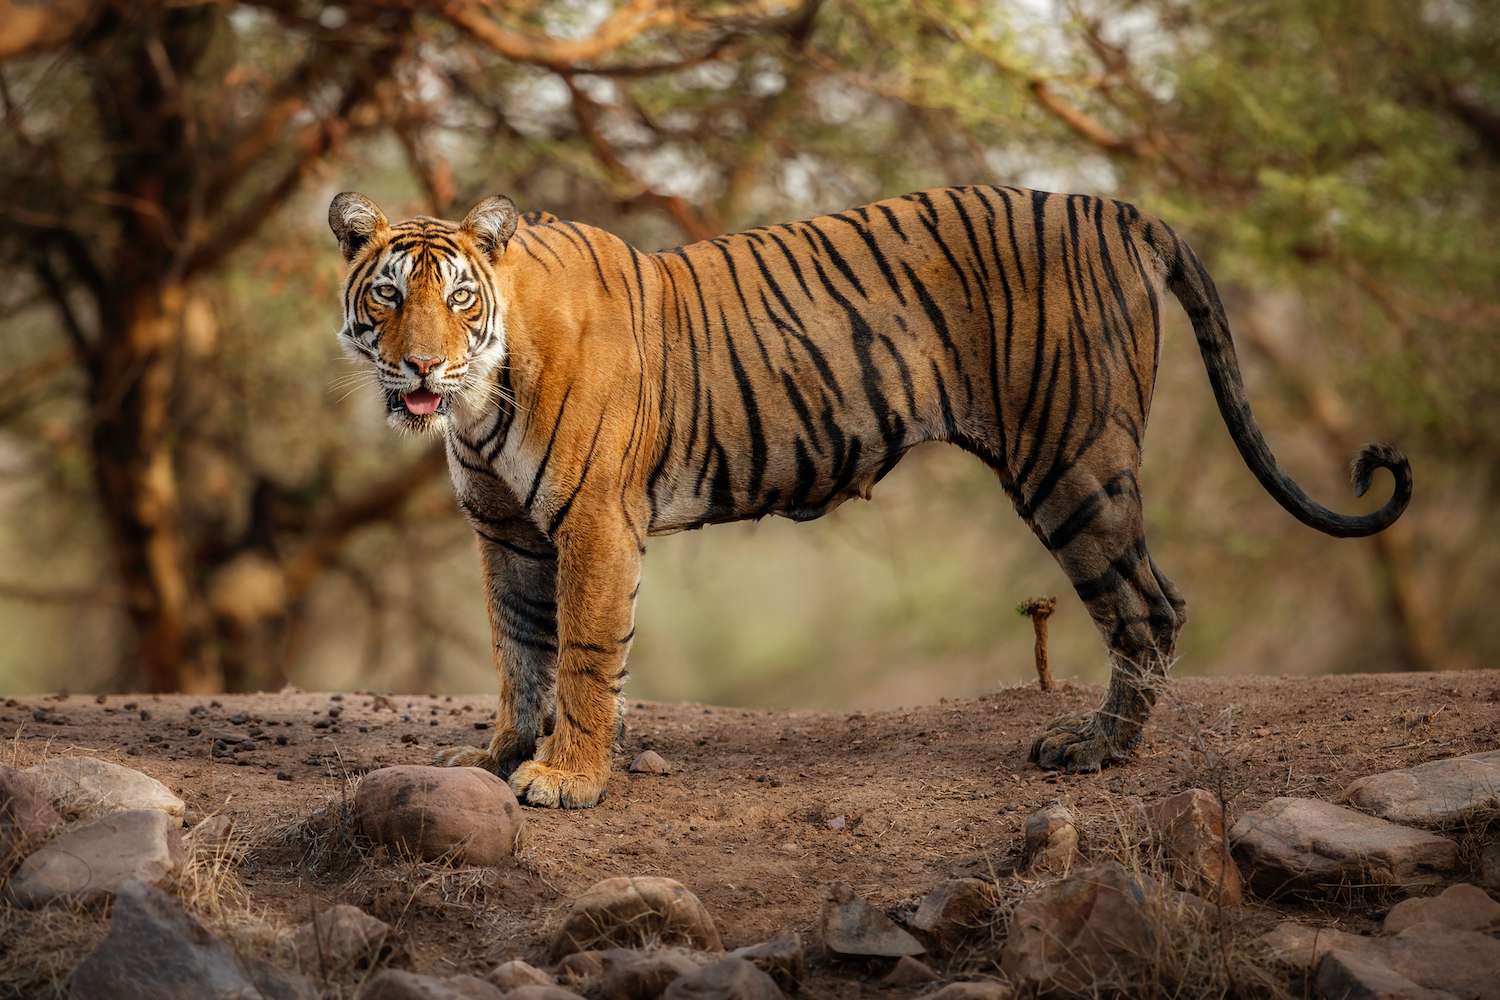 Young tiger female in a beautiful place full of color/wild animal in the nature habitat/India/big cats/endangered animals/close up with tigress